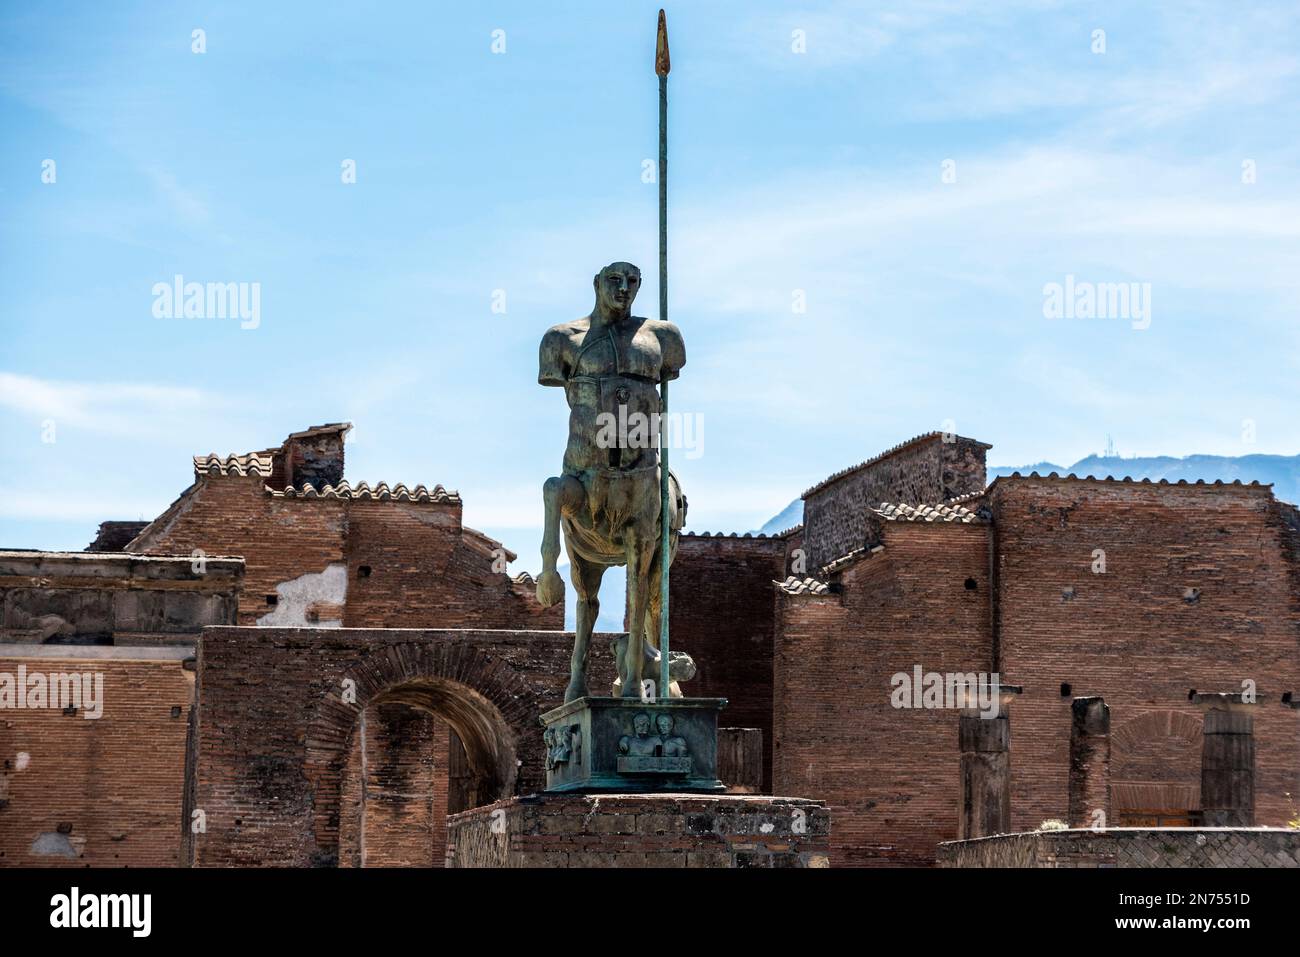 Beautiful statue of an ancient lancer on the forum of the ancient city of Pompeii, Southern Italy Stock Photo